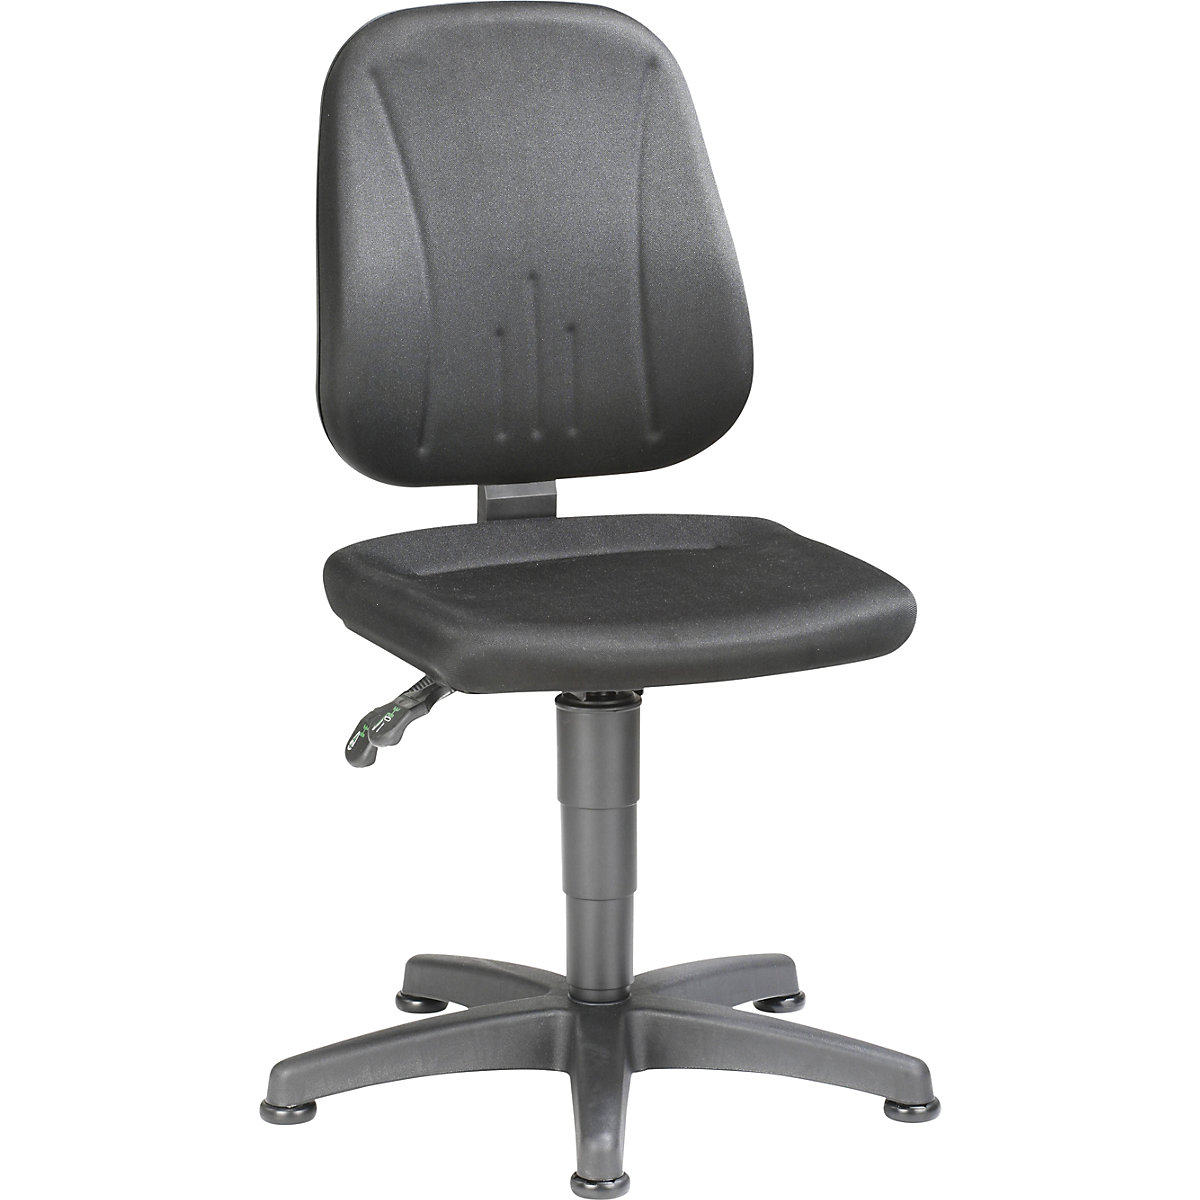 Industrial swivel chair – bimos, with gas lift height adjustment, fabric cover, black, with floor glides-4